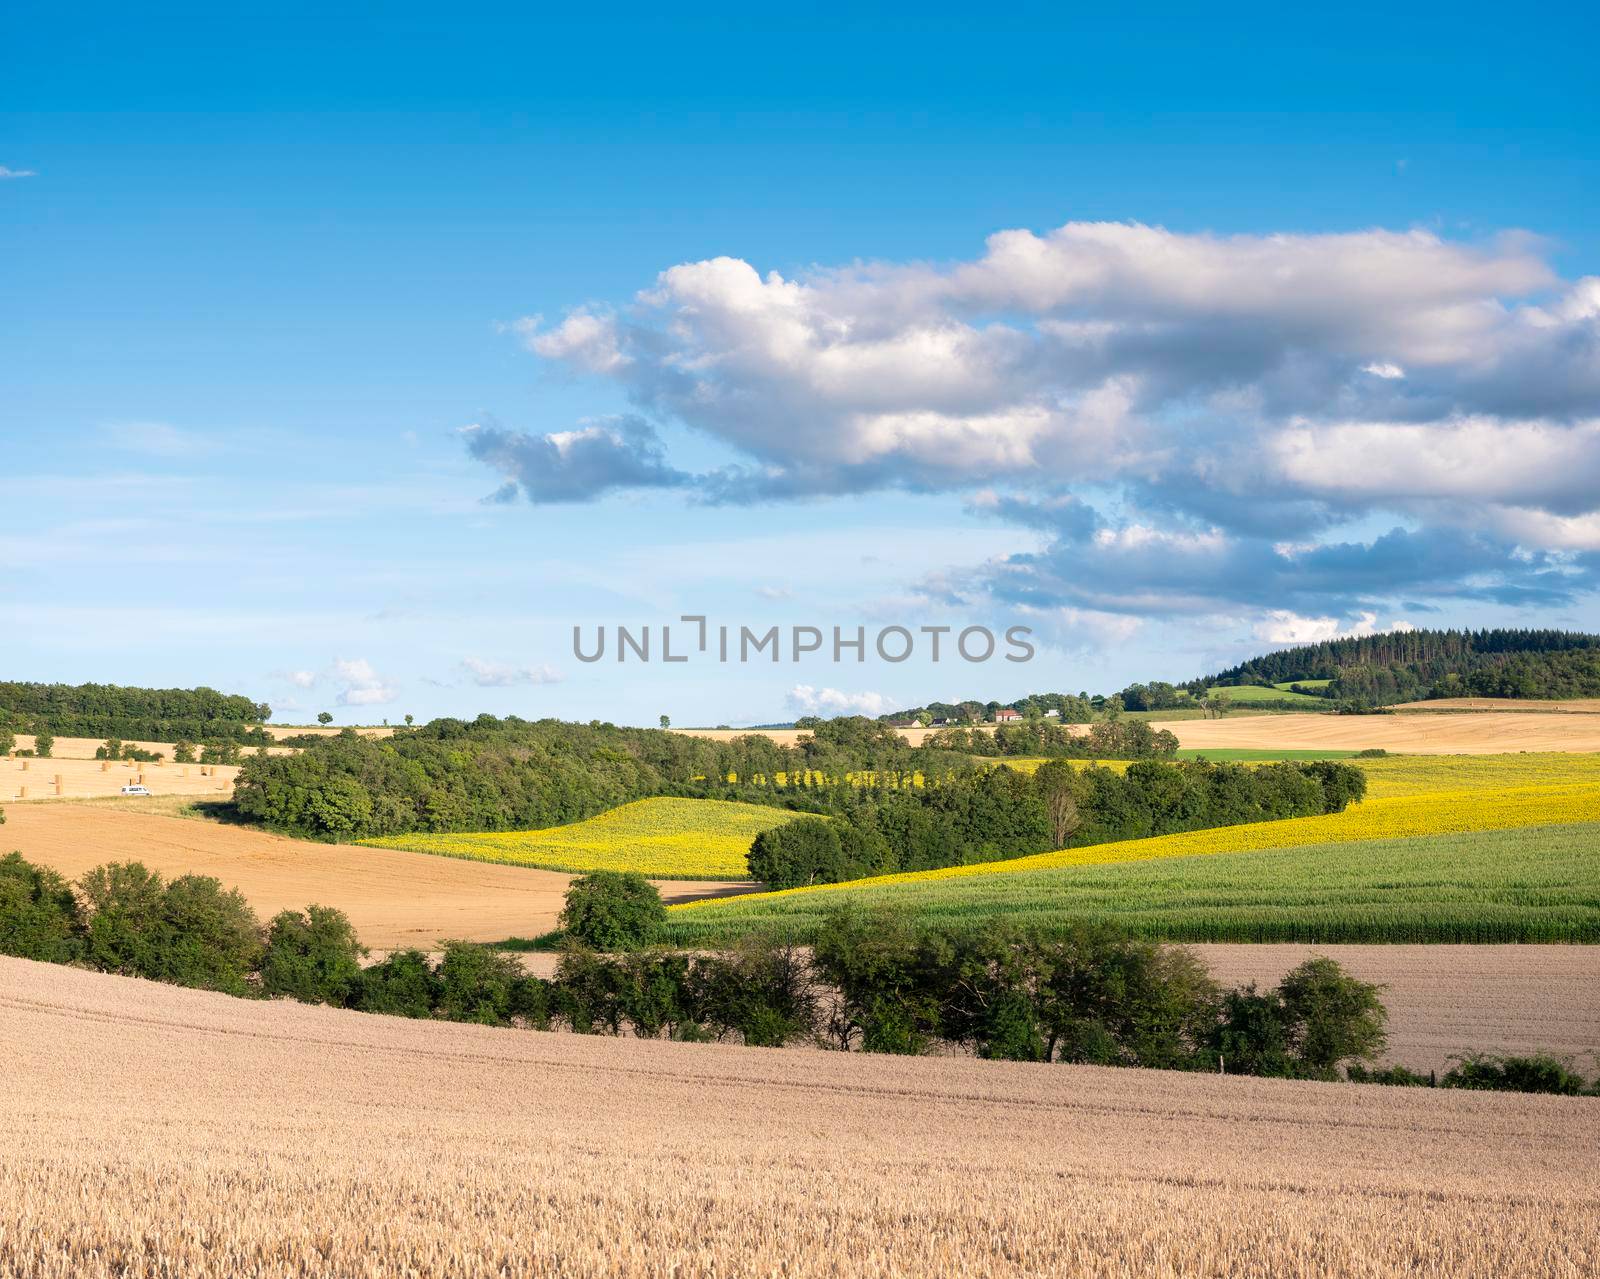 beautiful landscape of french morvan with green grassy fields and forests under blue sky with clouds by ahavelaar